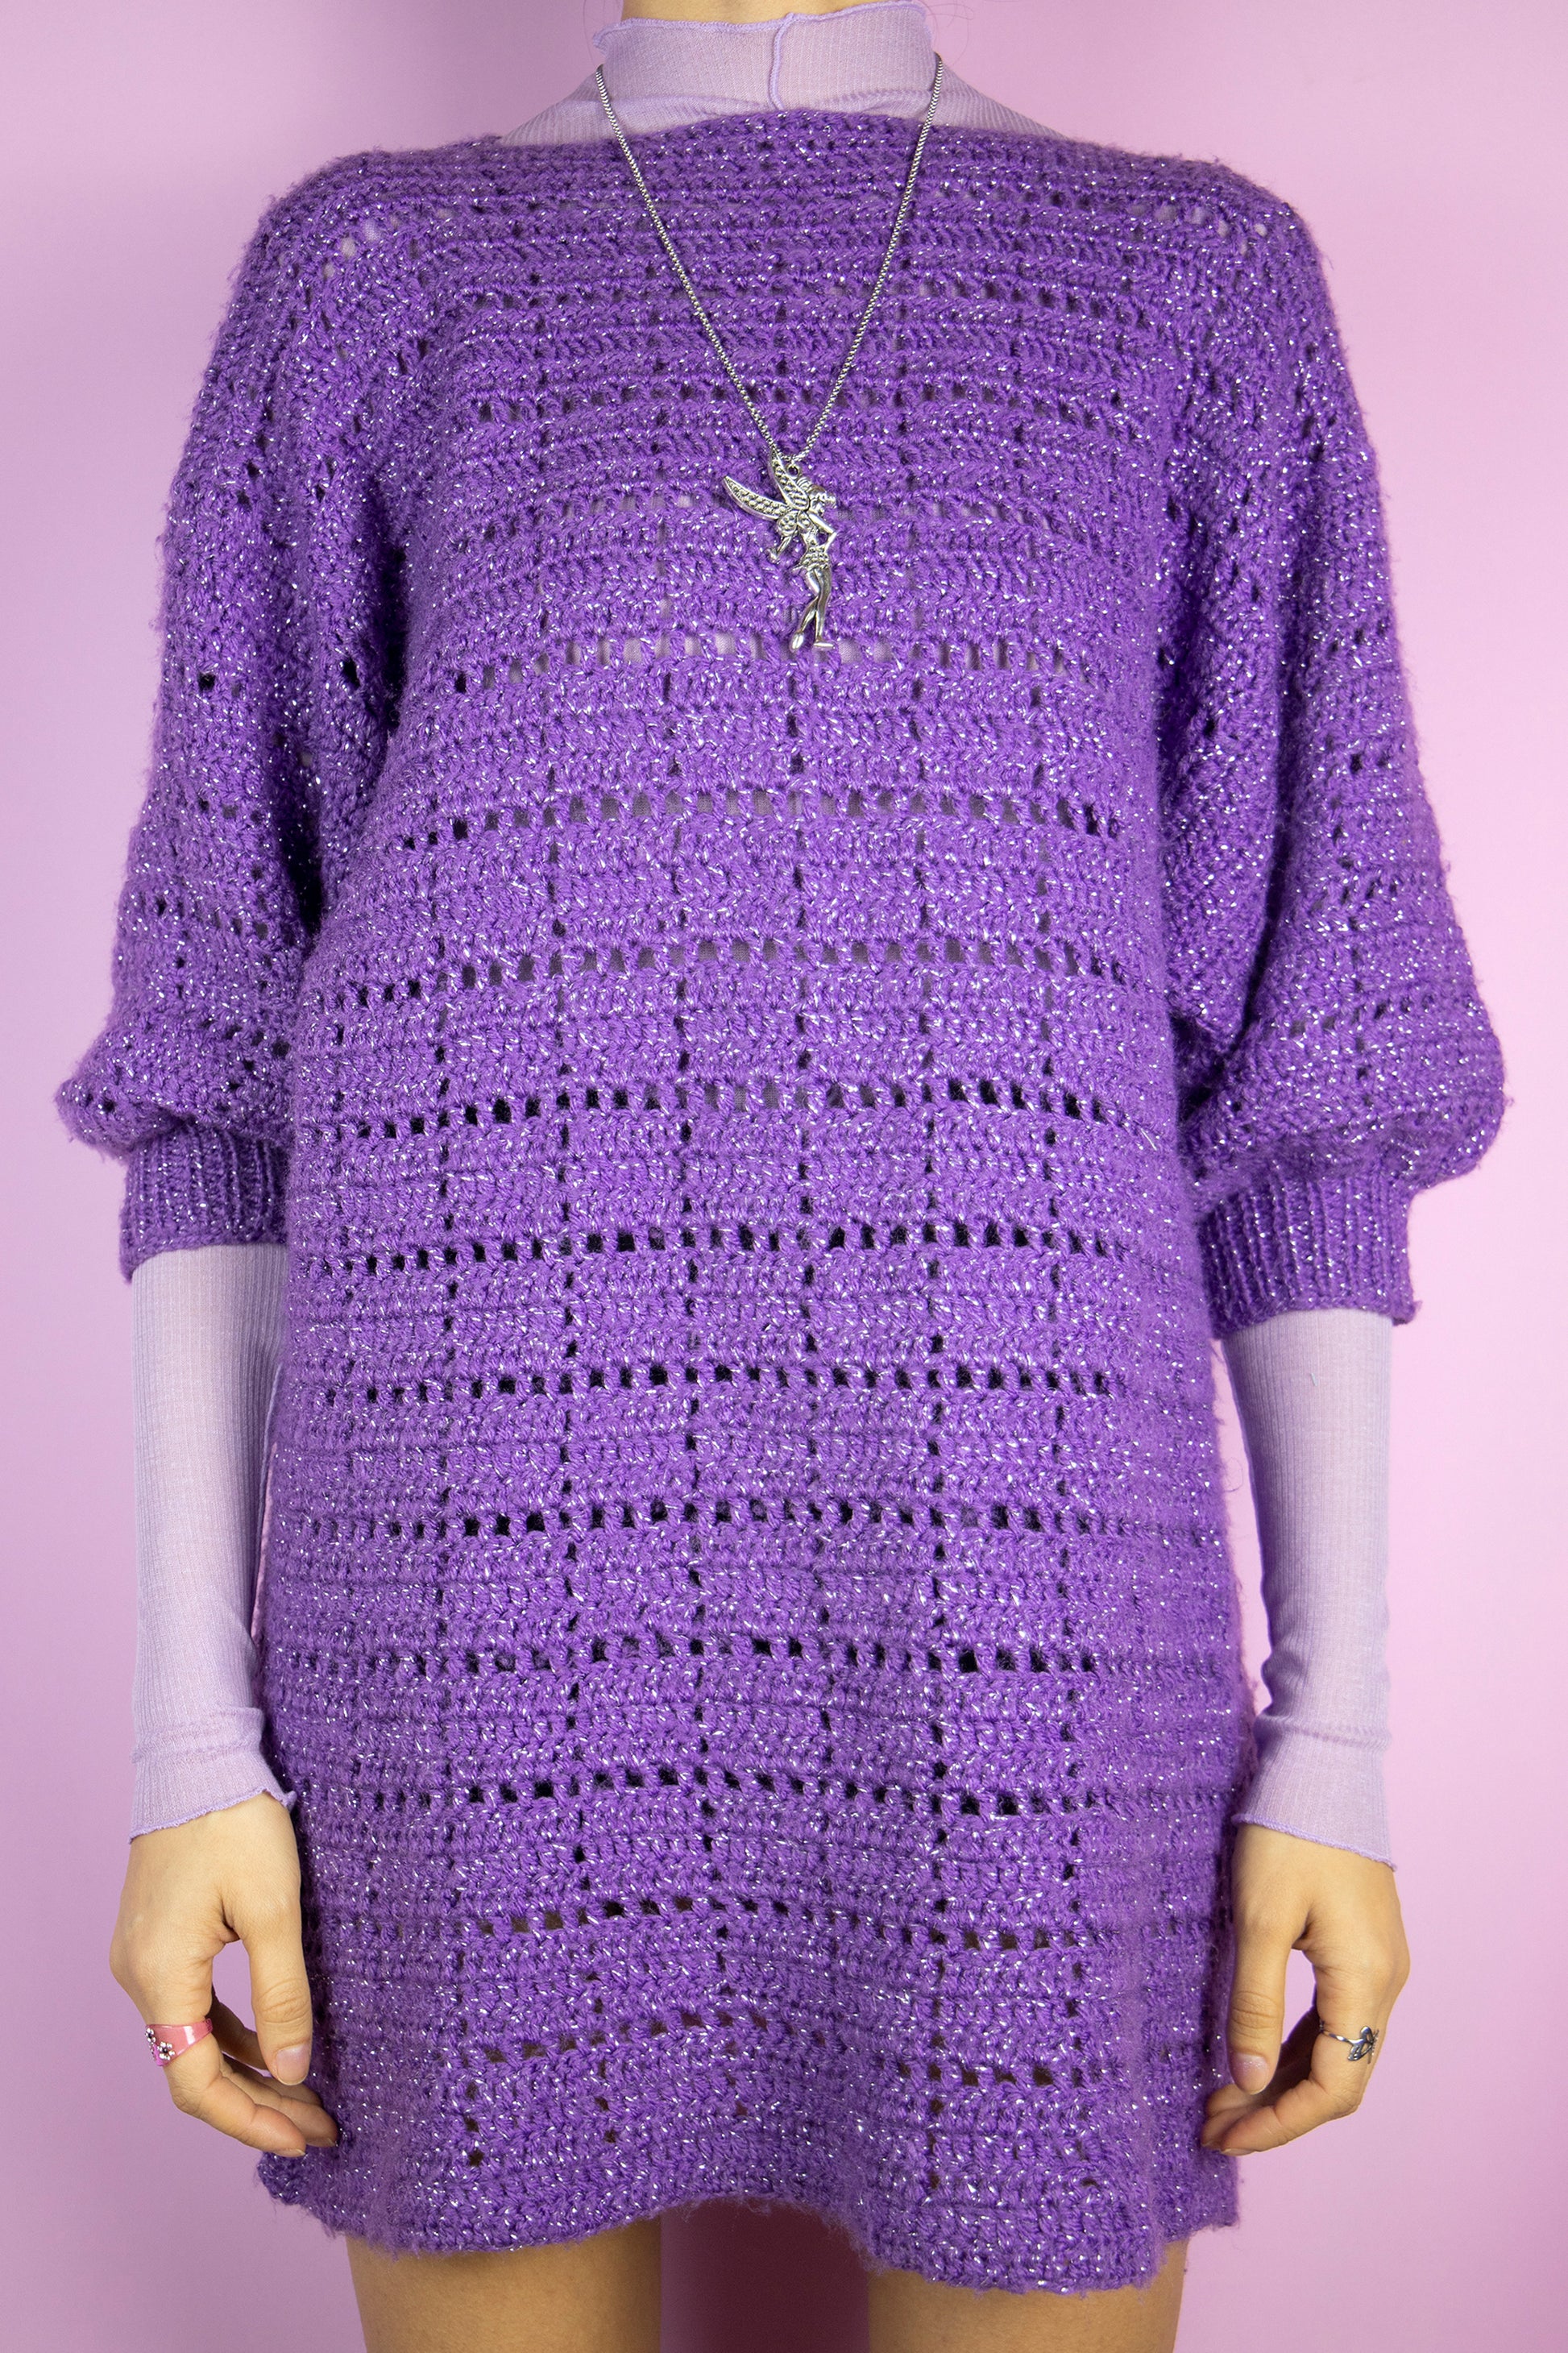 The Vintage 90s Purple Crochet Knit Sweater is a purple chunky knit short sleeve pullover with silver threads details. Lovely boho party 1990s statement sweater.